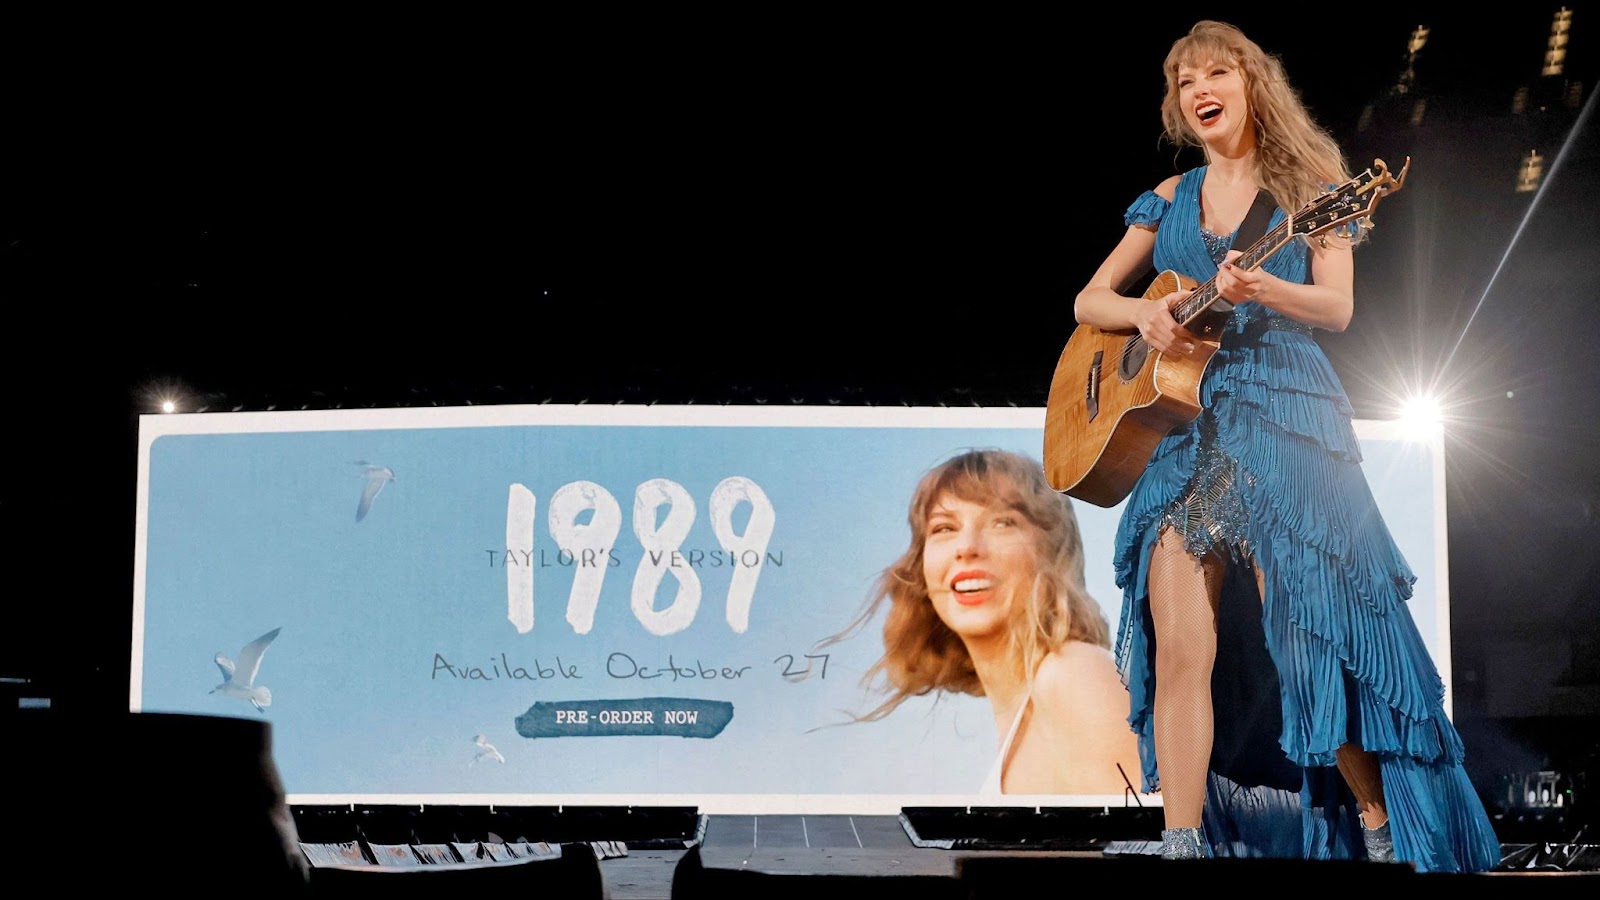  Taylor Swift announces the release of 1989 (Taylor’s Version) during the Los Angeles leg of the Eras Tour to hundreds of anticipating fans. 
